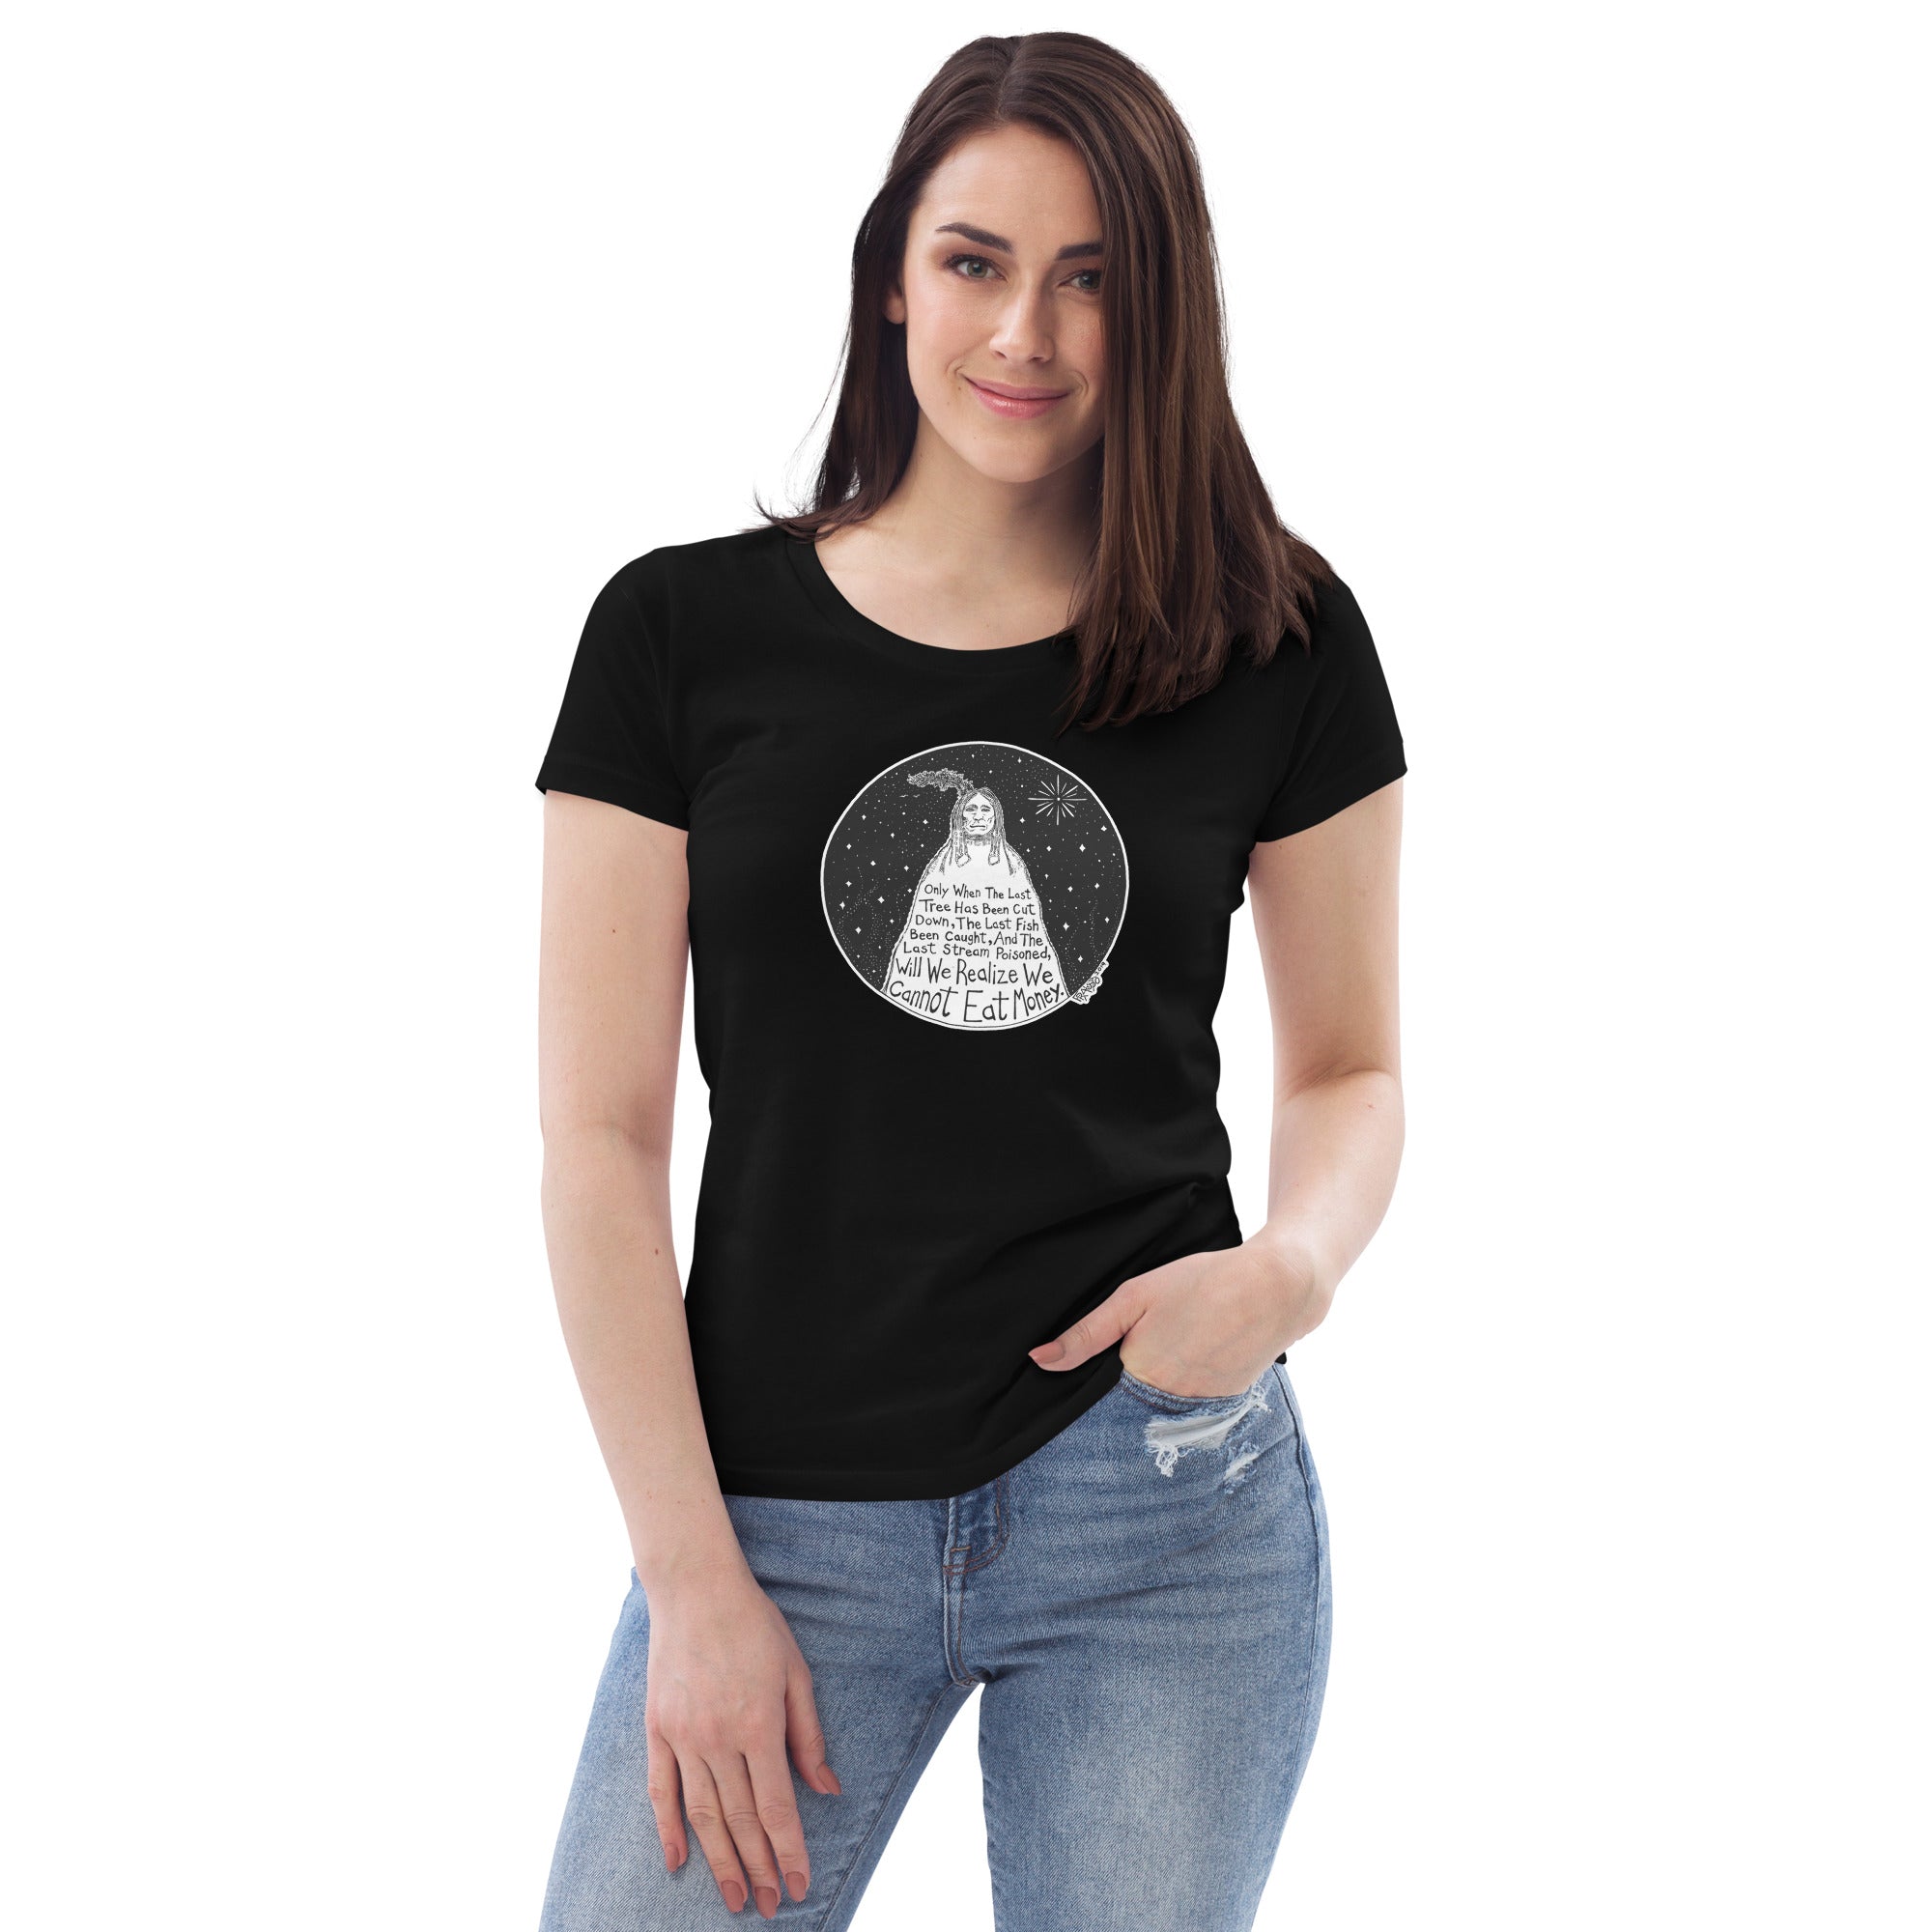 Native American Proverb Organic Cotton Scoop Neck T-Shirt By Artist Rick Frausto